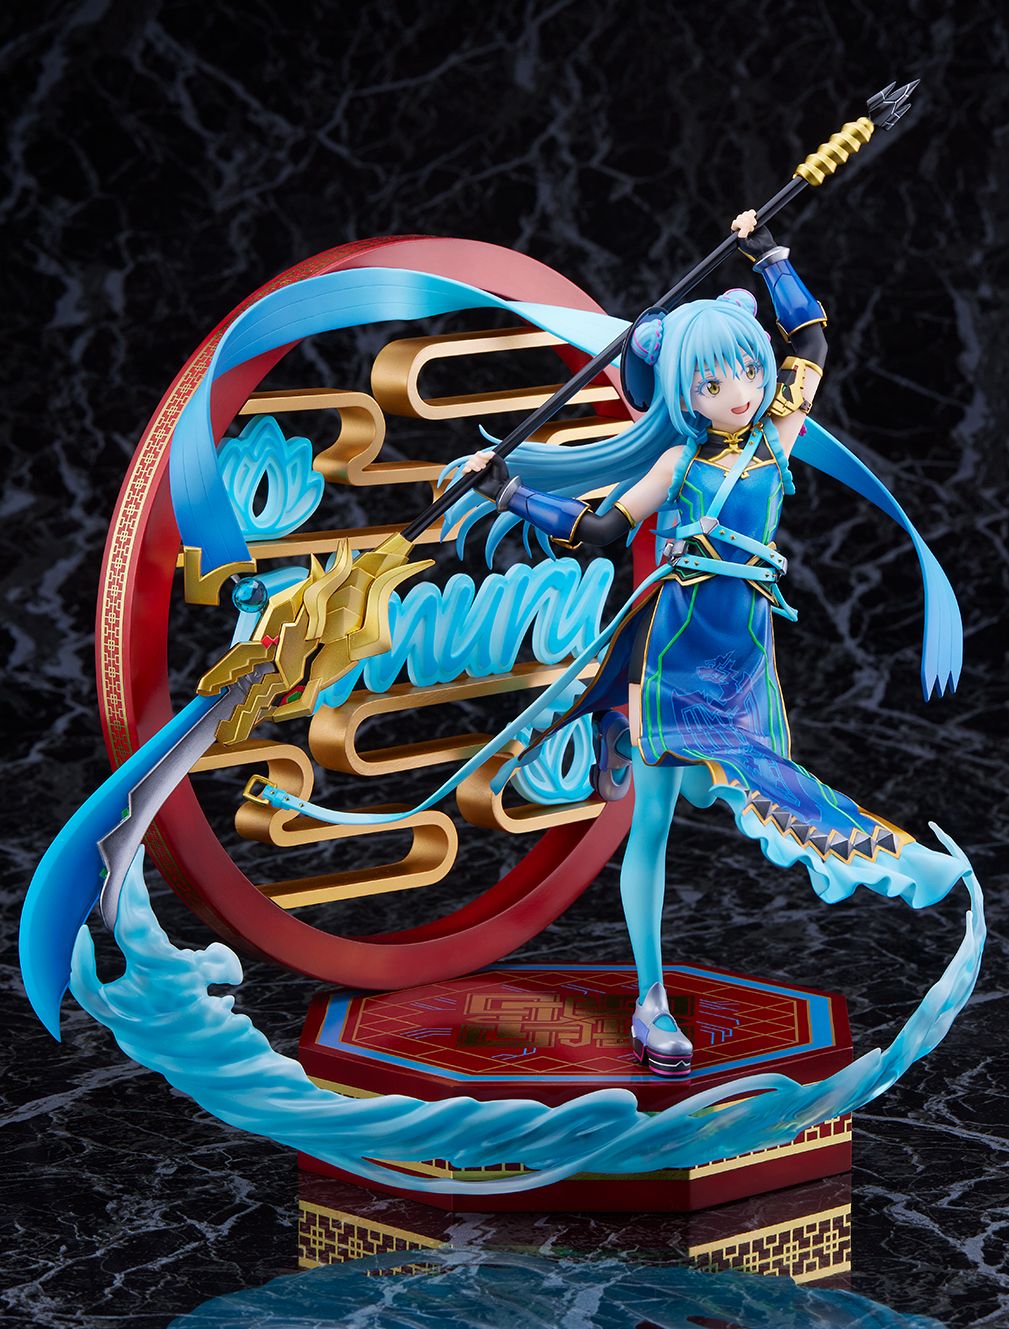 That Time I Got Reincarnated as a Slime Rimuru-Tempest -Busting Force Ver.- 1/7th Scale Figure | animota